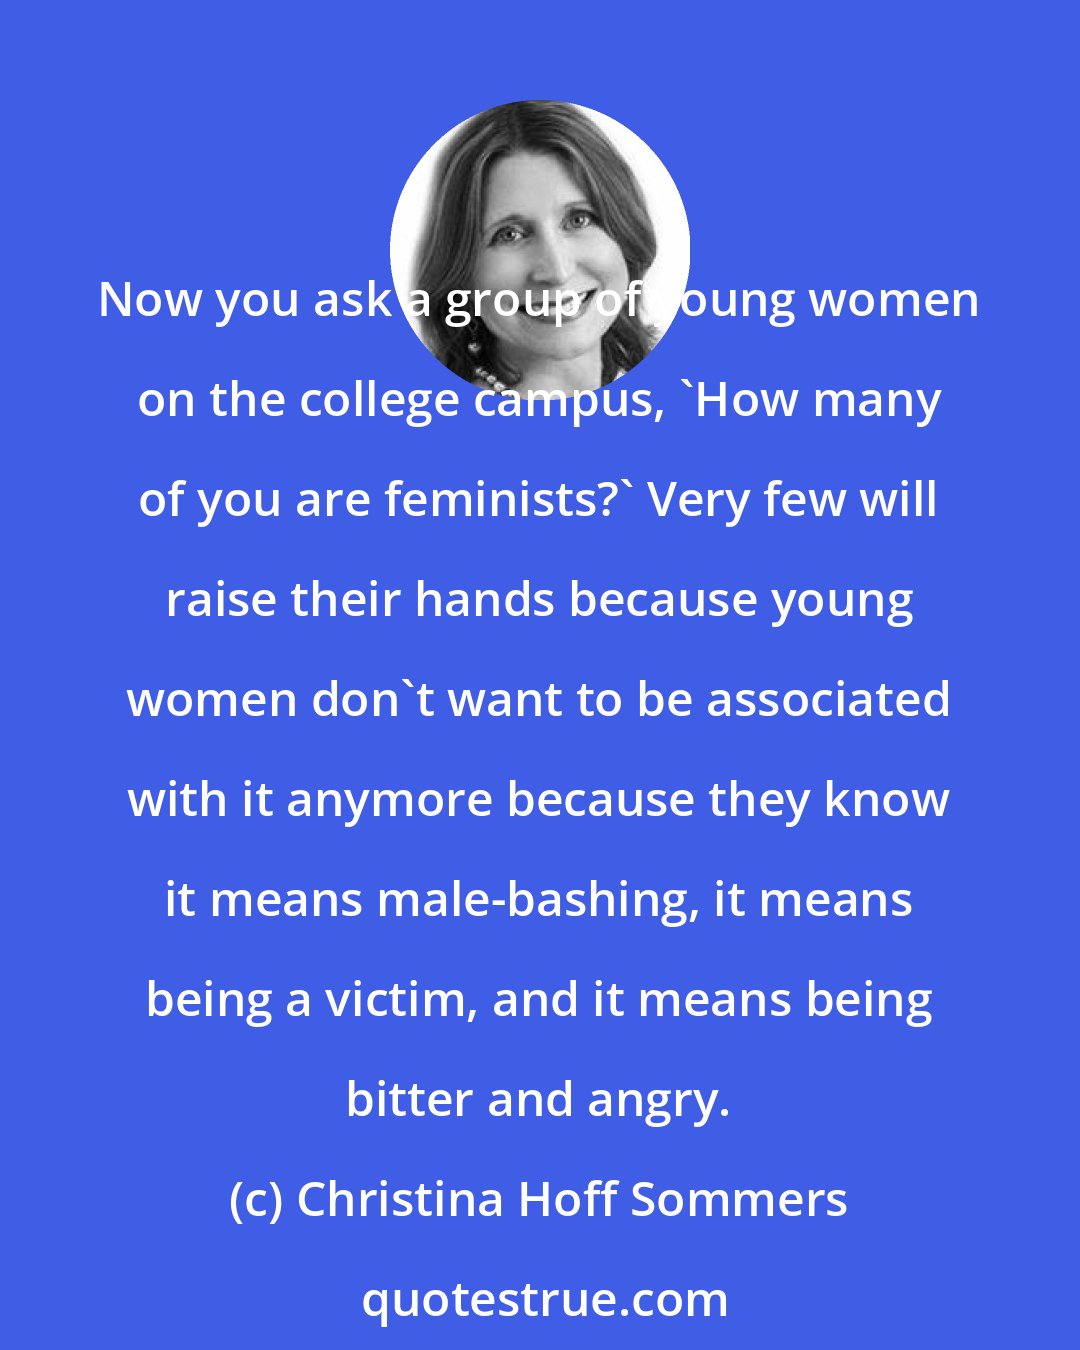 Christina Hoff Sommers: Now you ask a group of young women on the college campus, 'How many of you are feminists?' Very few will raise their hands because young women don't want to be associated with it anymore because they know it means male-bashing, it means being a victim, and it means being bitter and angry.